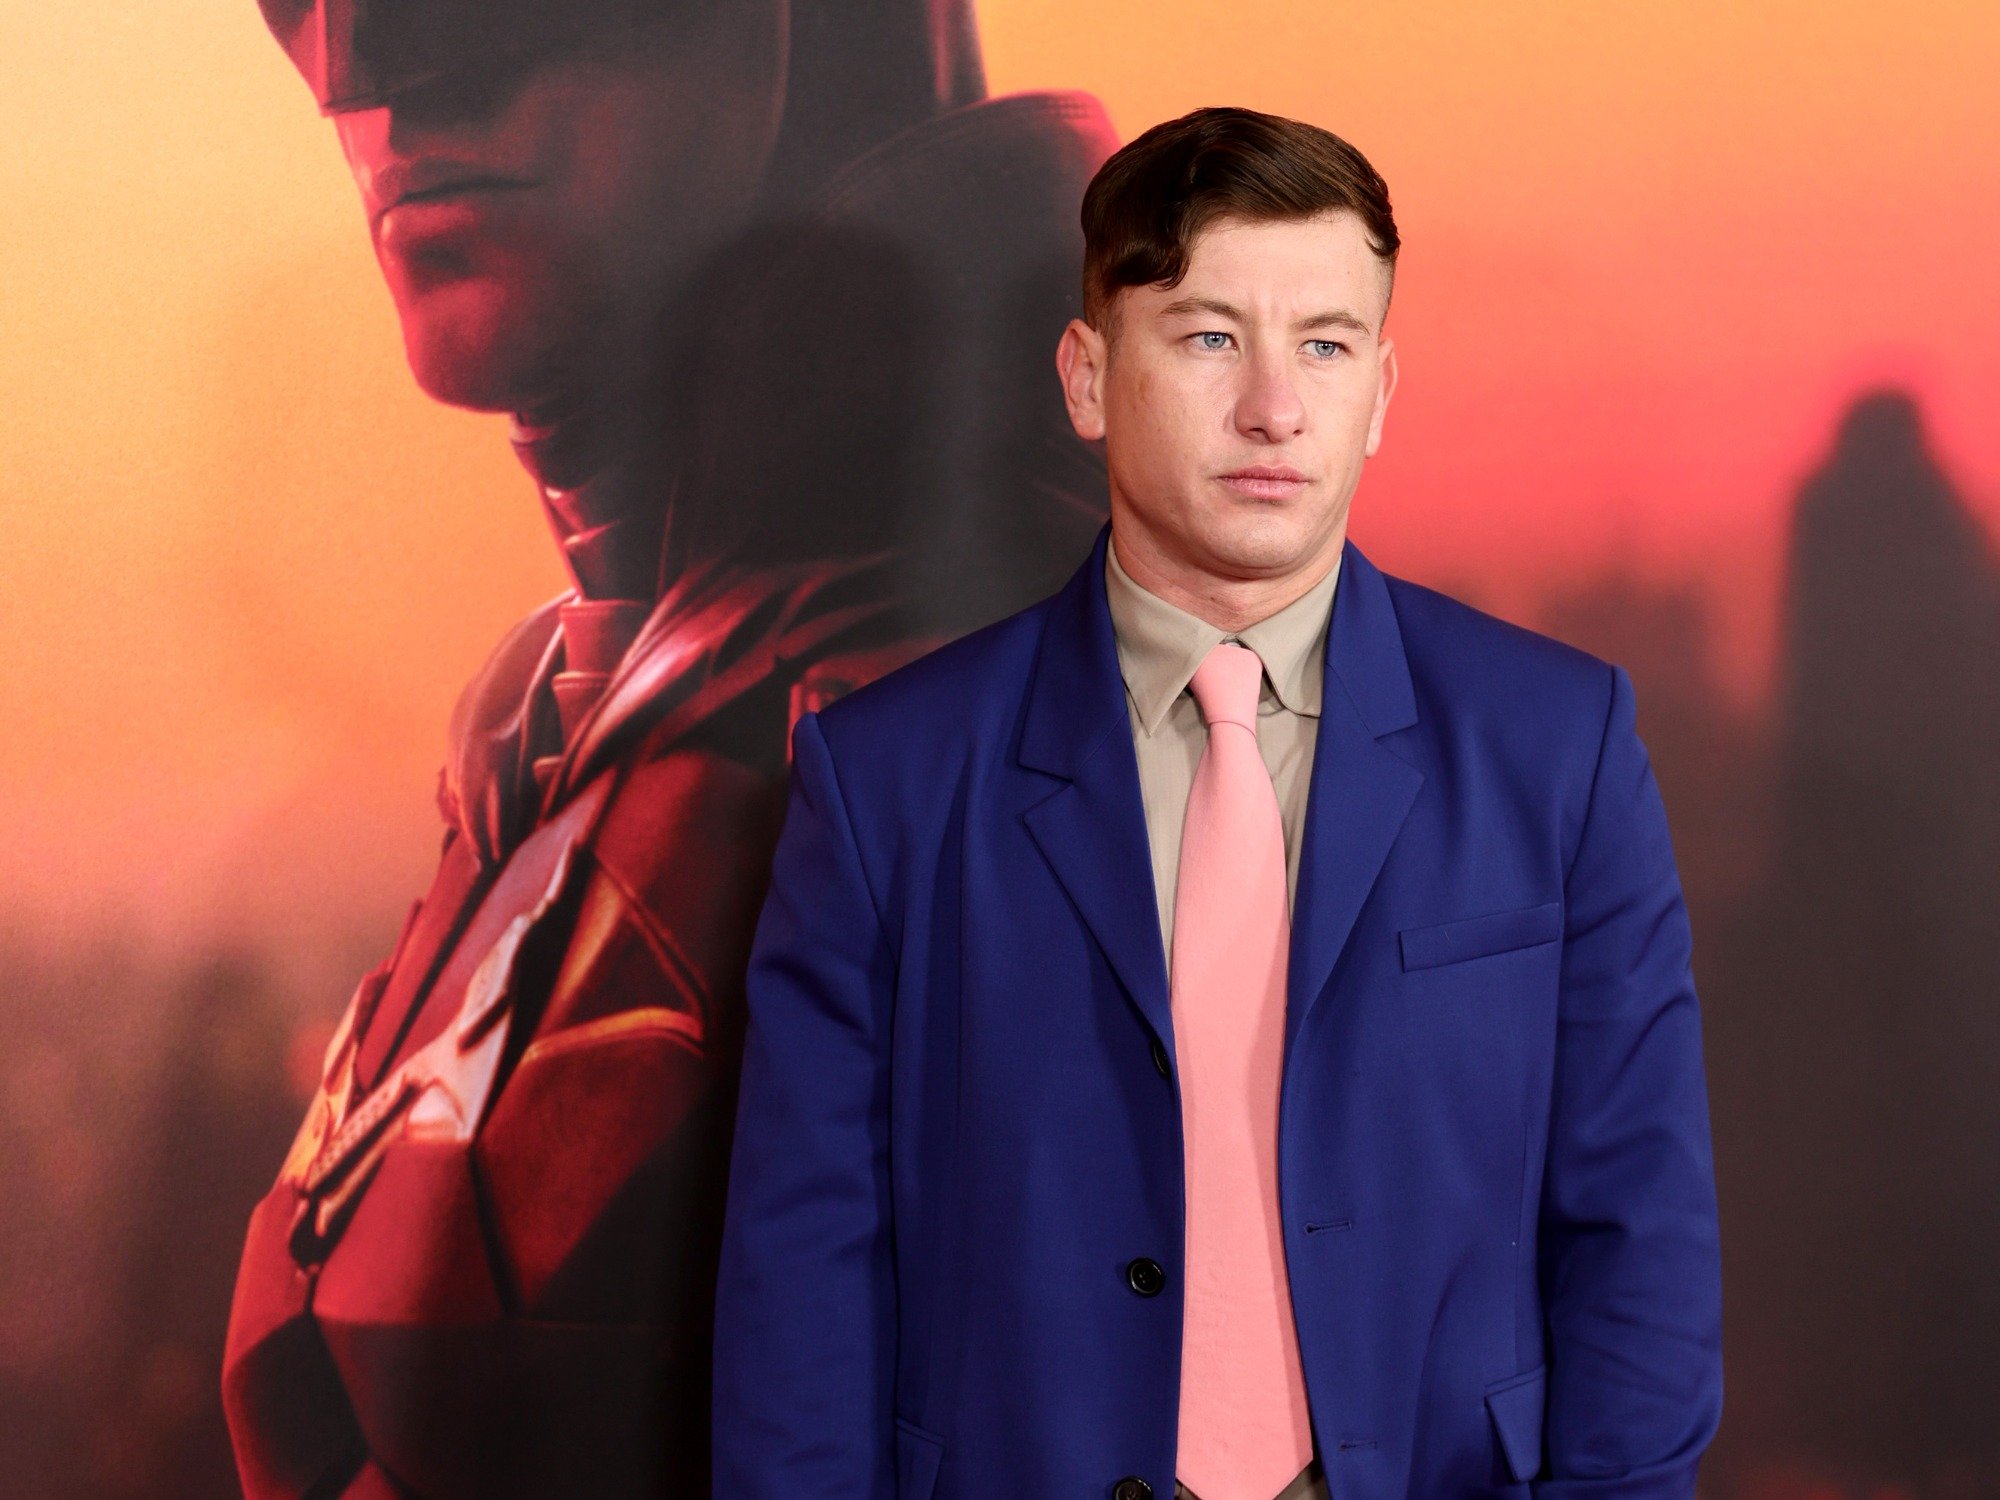 Barry Keoghan at 'The Batman' premiere. He's standing in front of a picture of Batman and wearing a blue suit and pink tie.